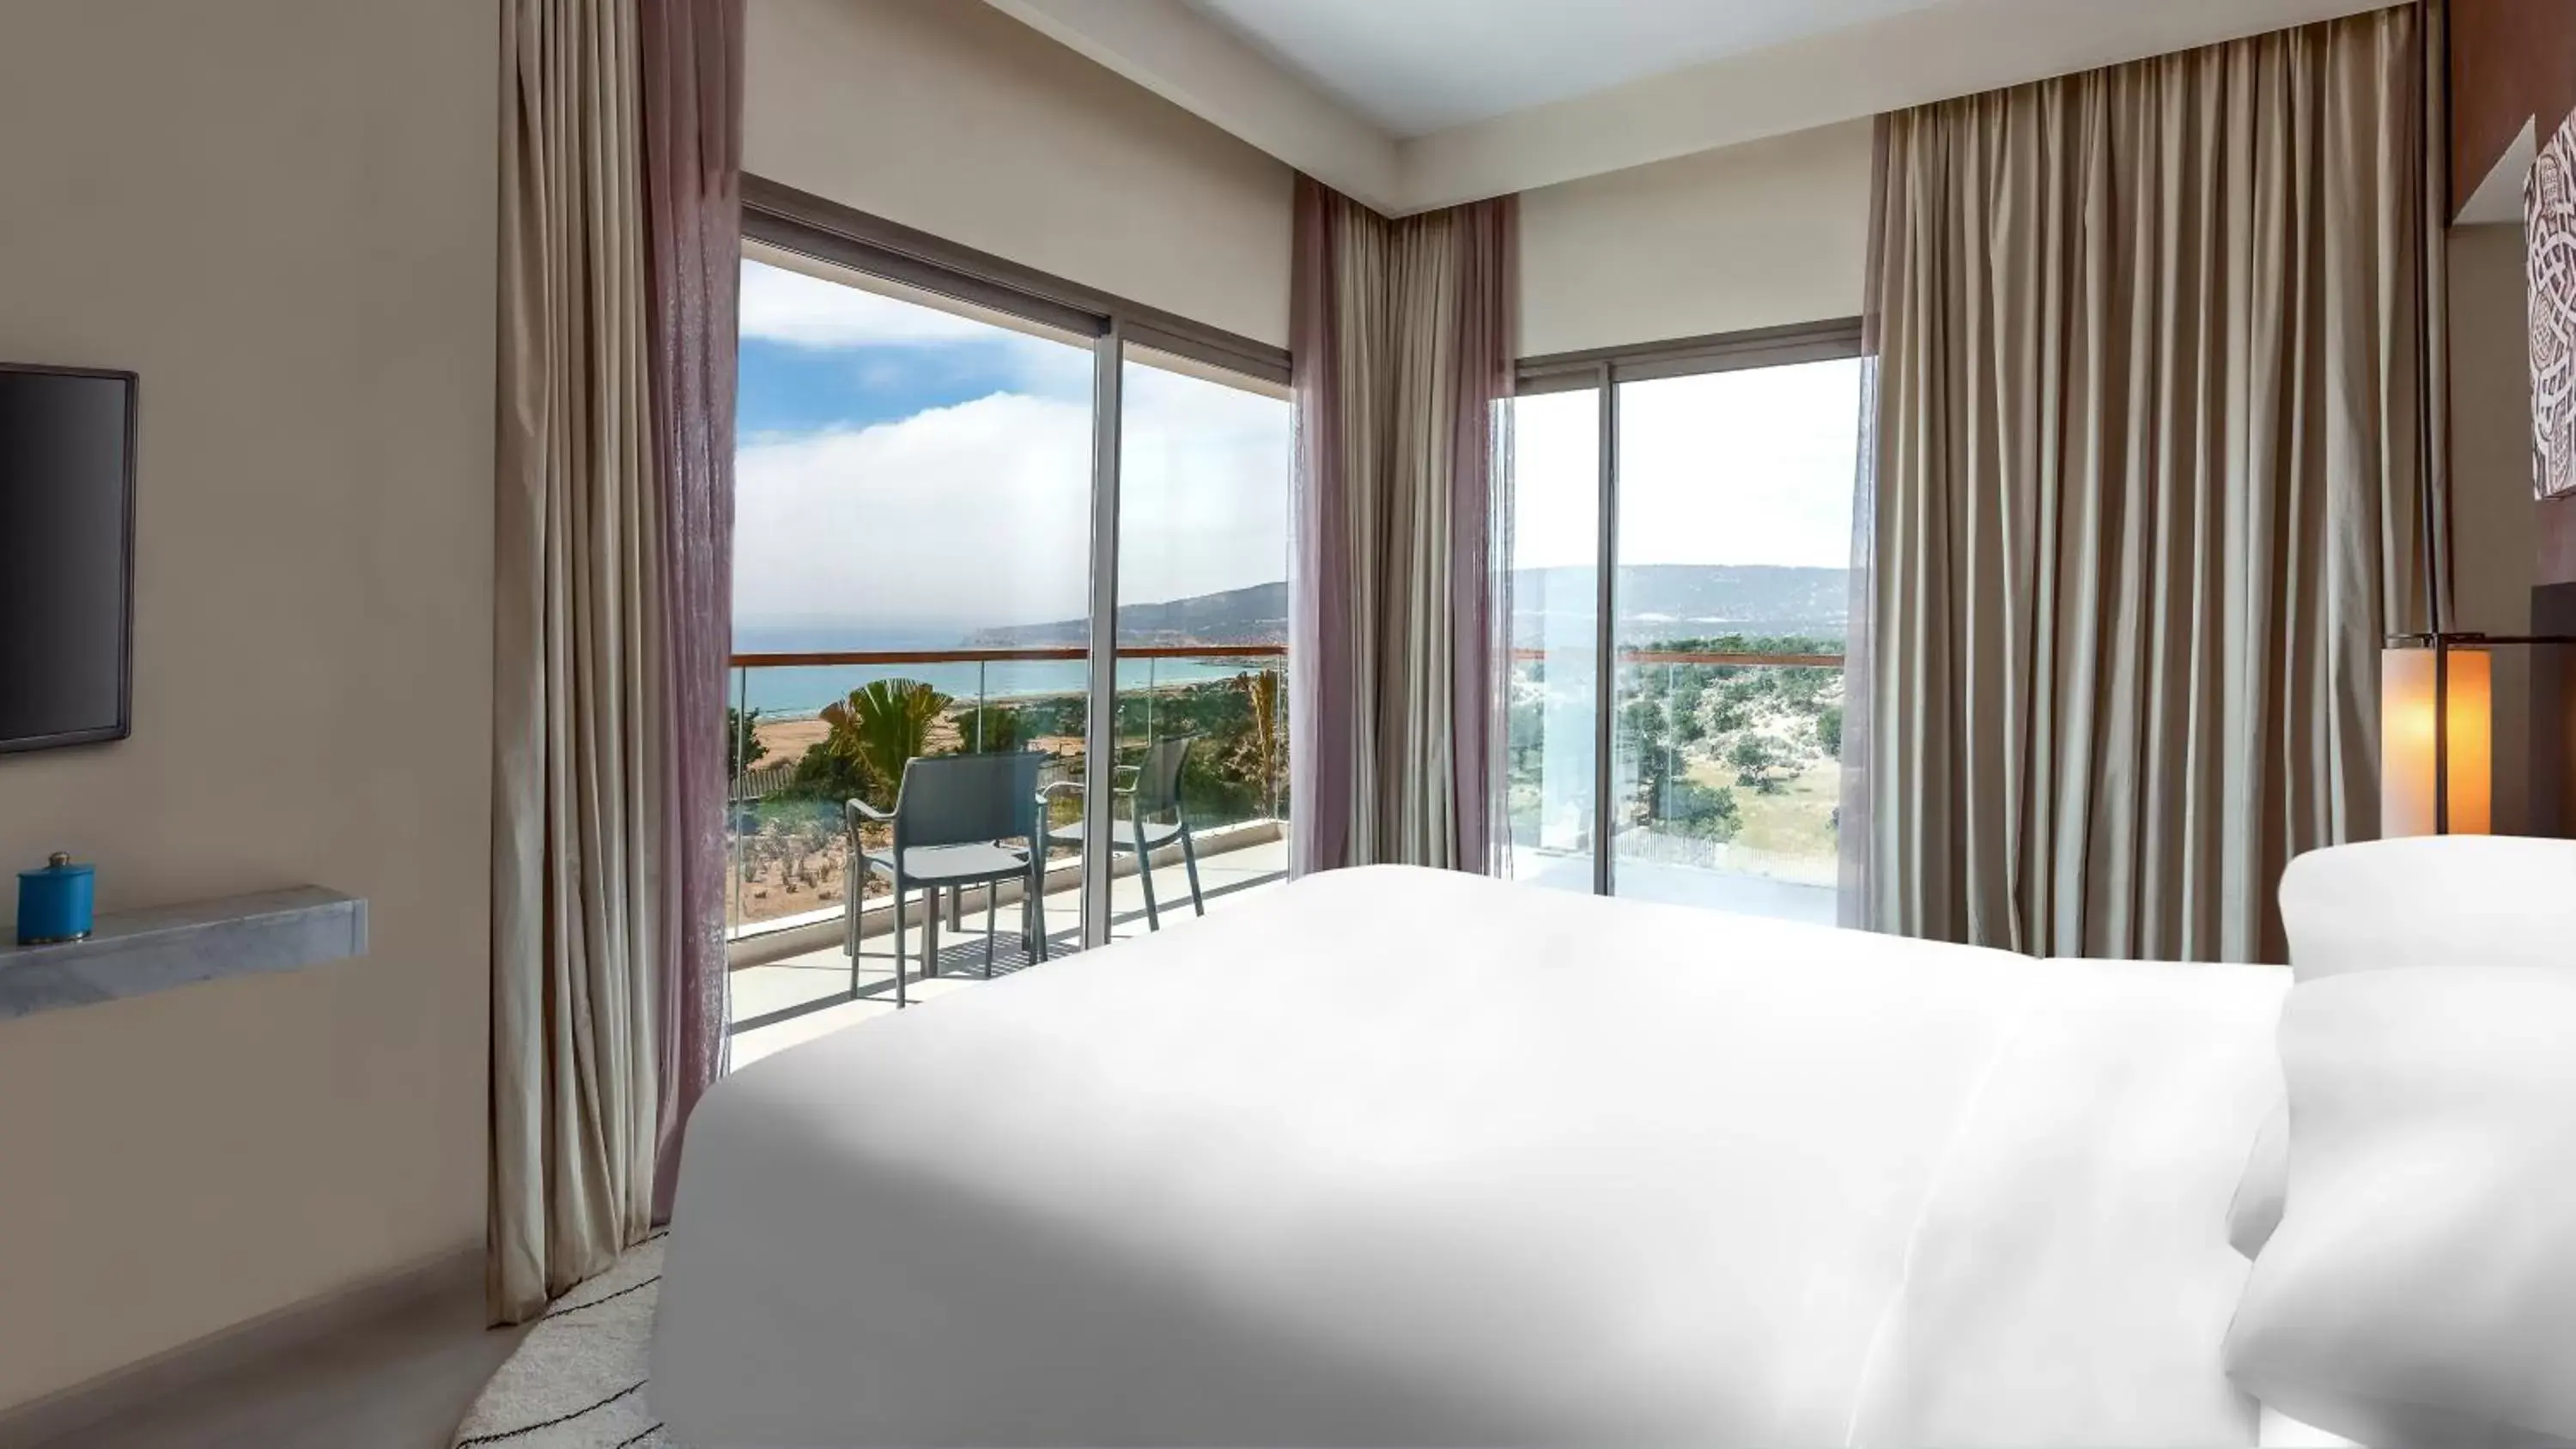 Specialty King Suite - single occupancy in Hyatt Place Taghazout Bay